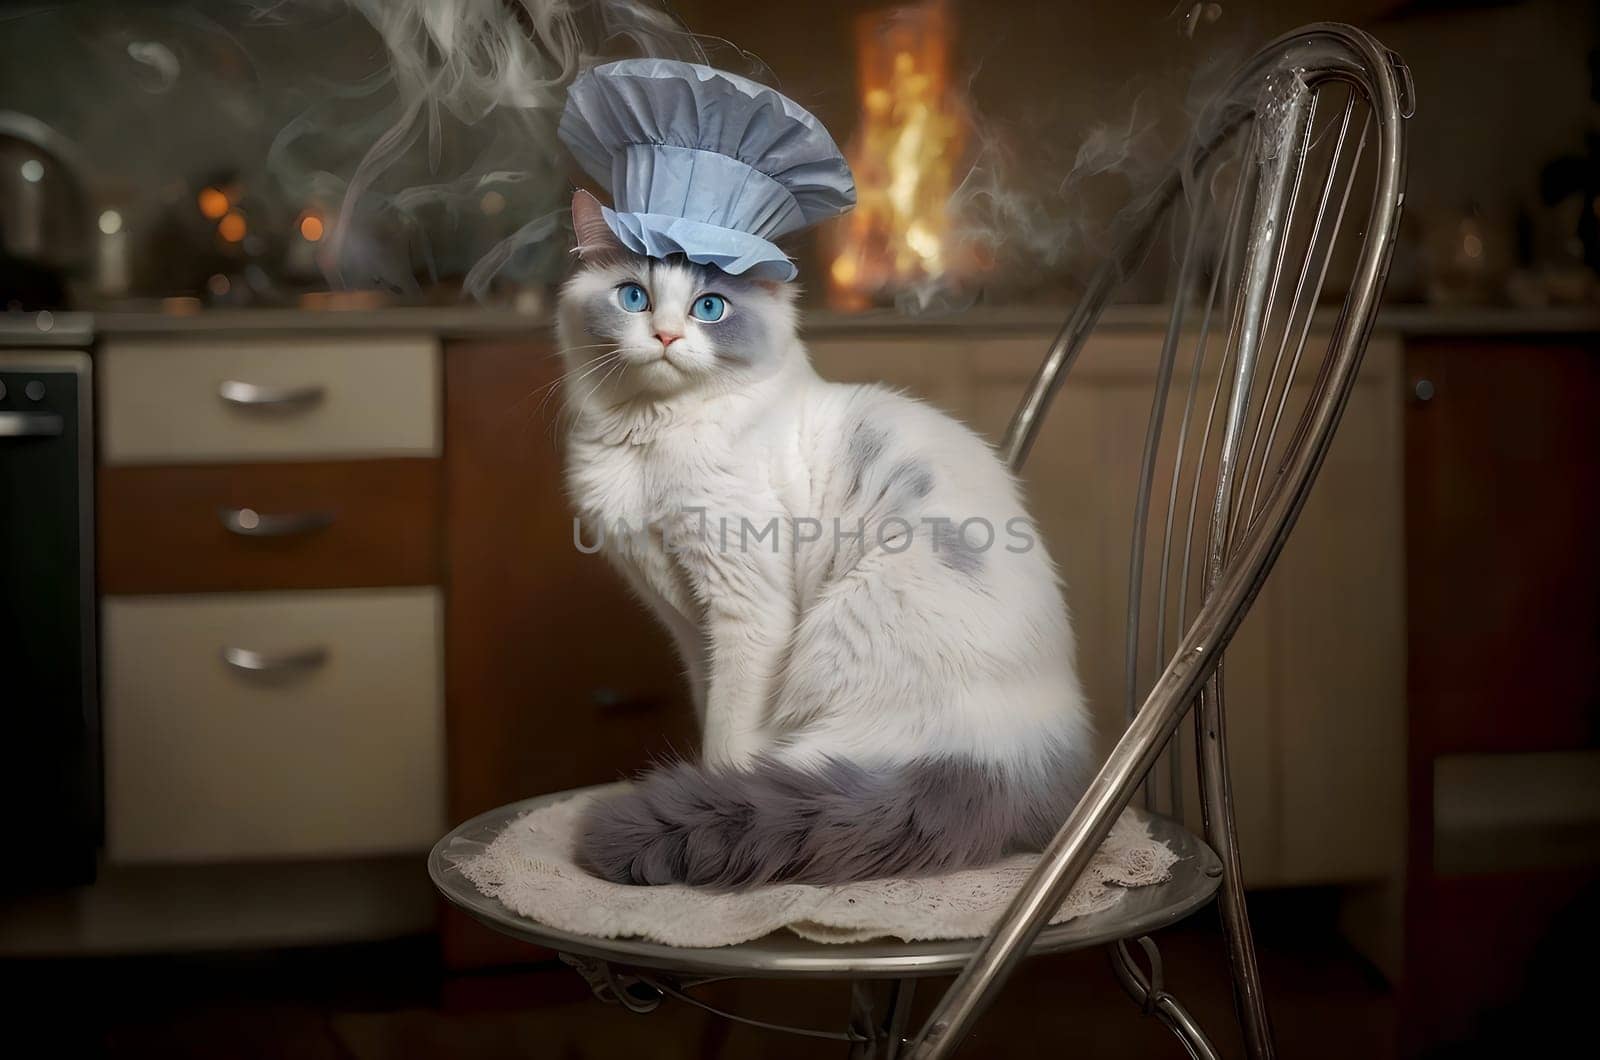 A cat cook sits on a chair in the kitchen during a fire. AI generated image.